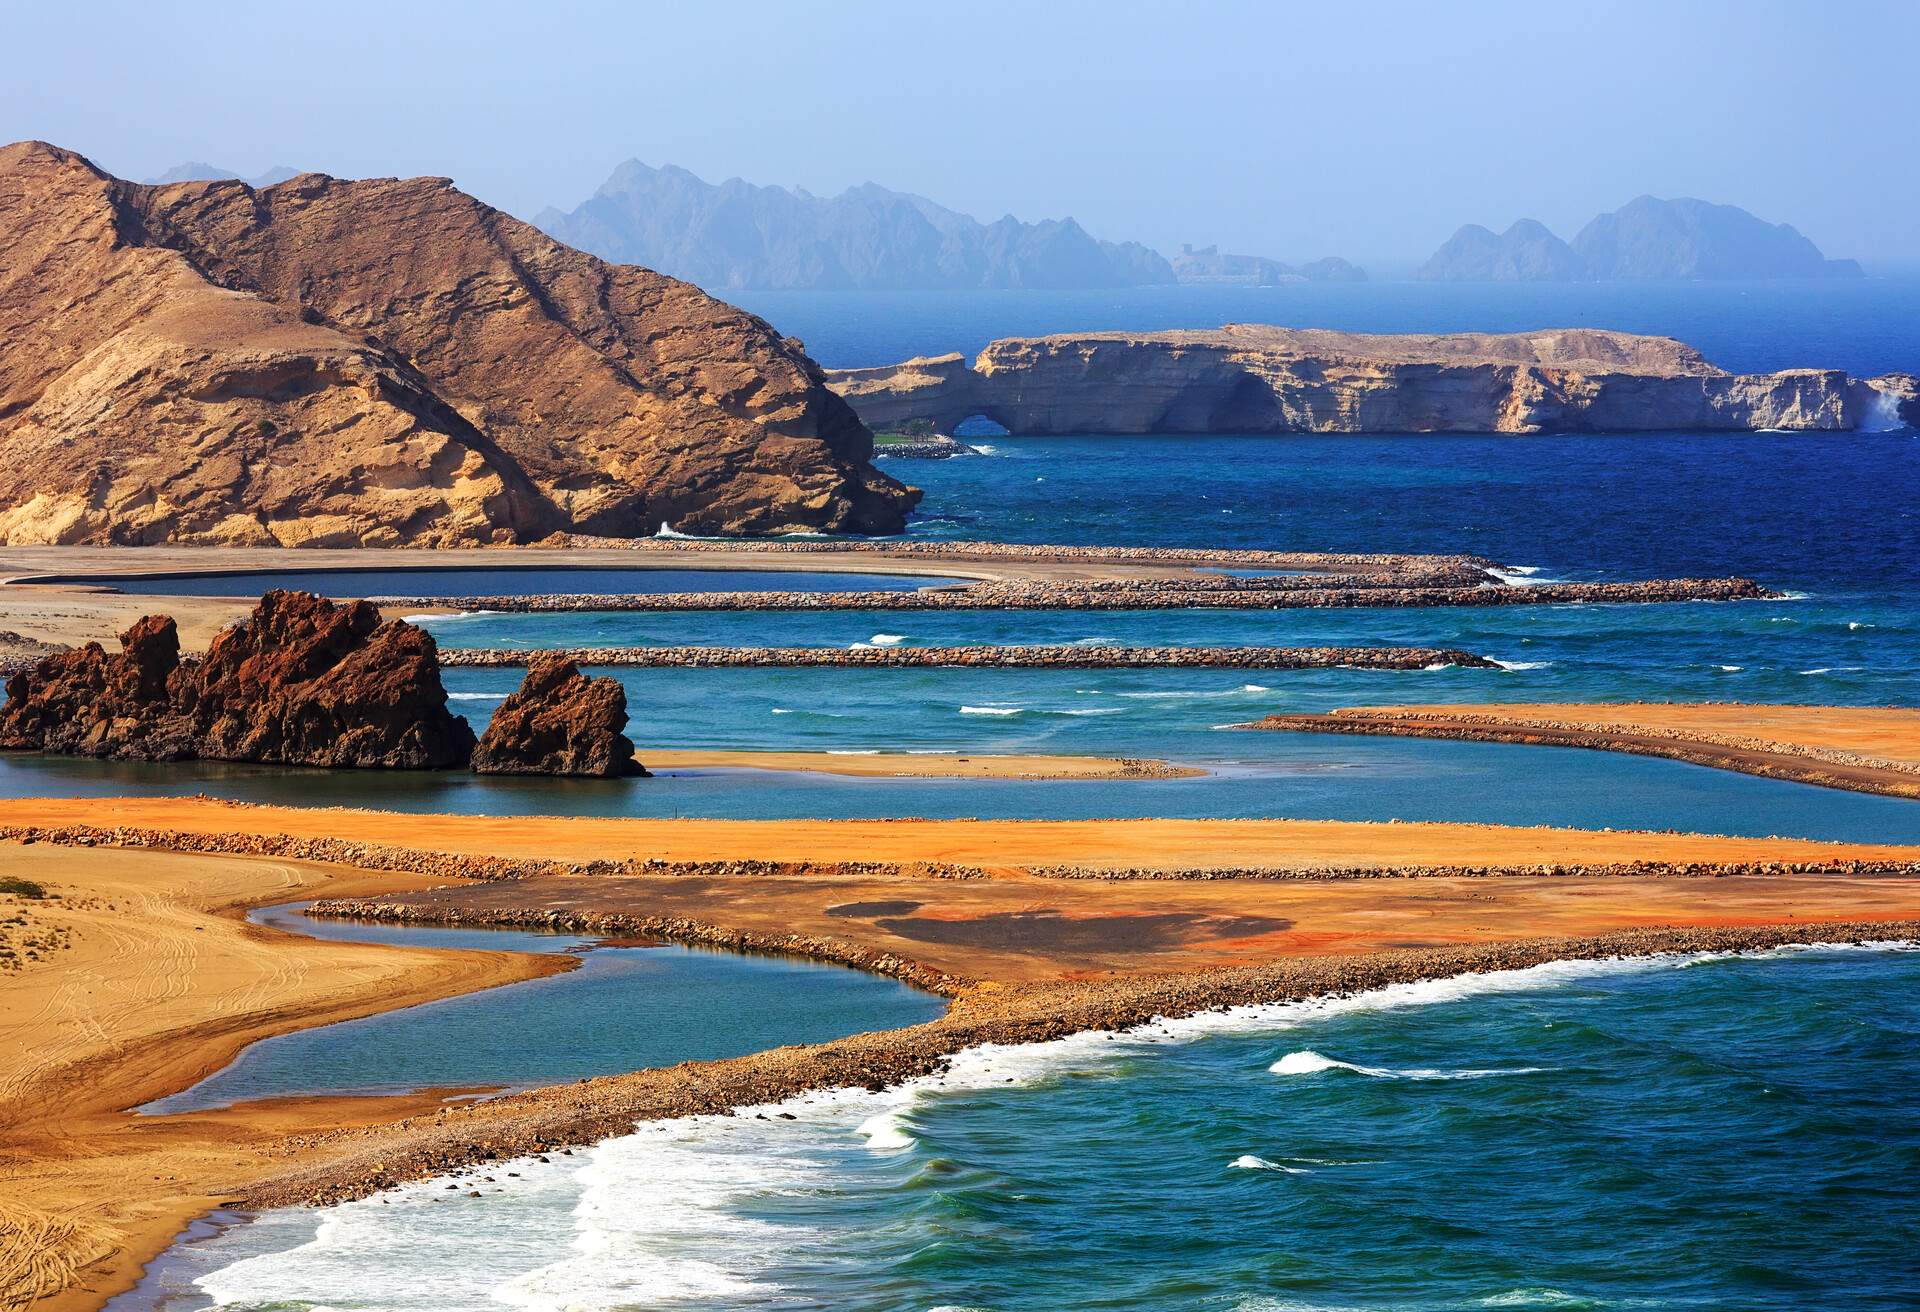 The blue sea flooding over the golden sand beach protected by rugged rock formations.